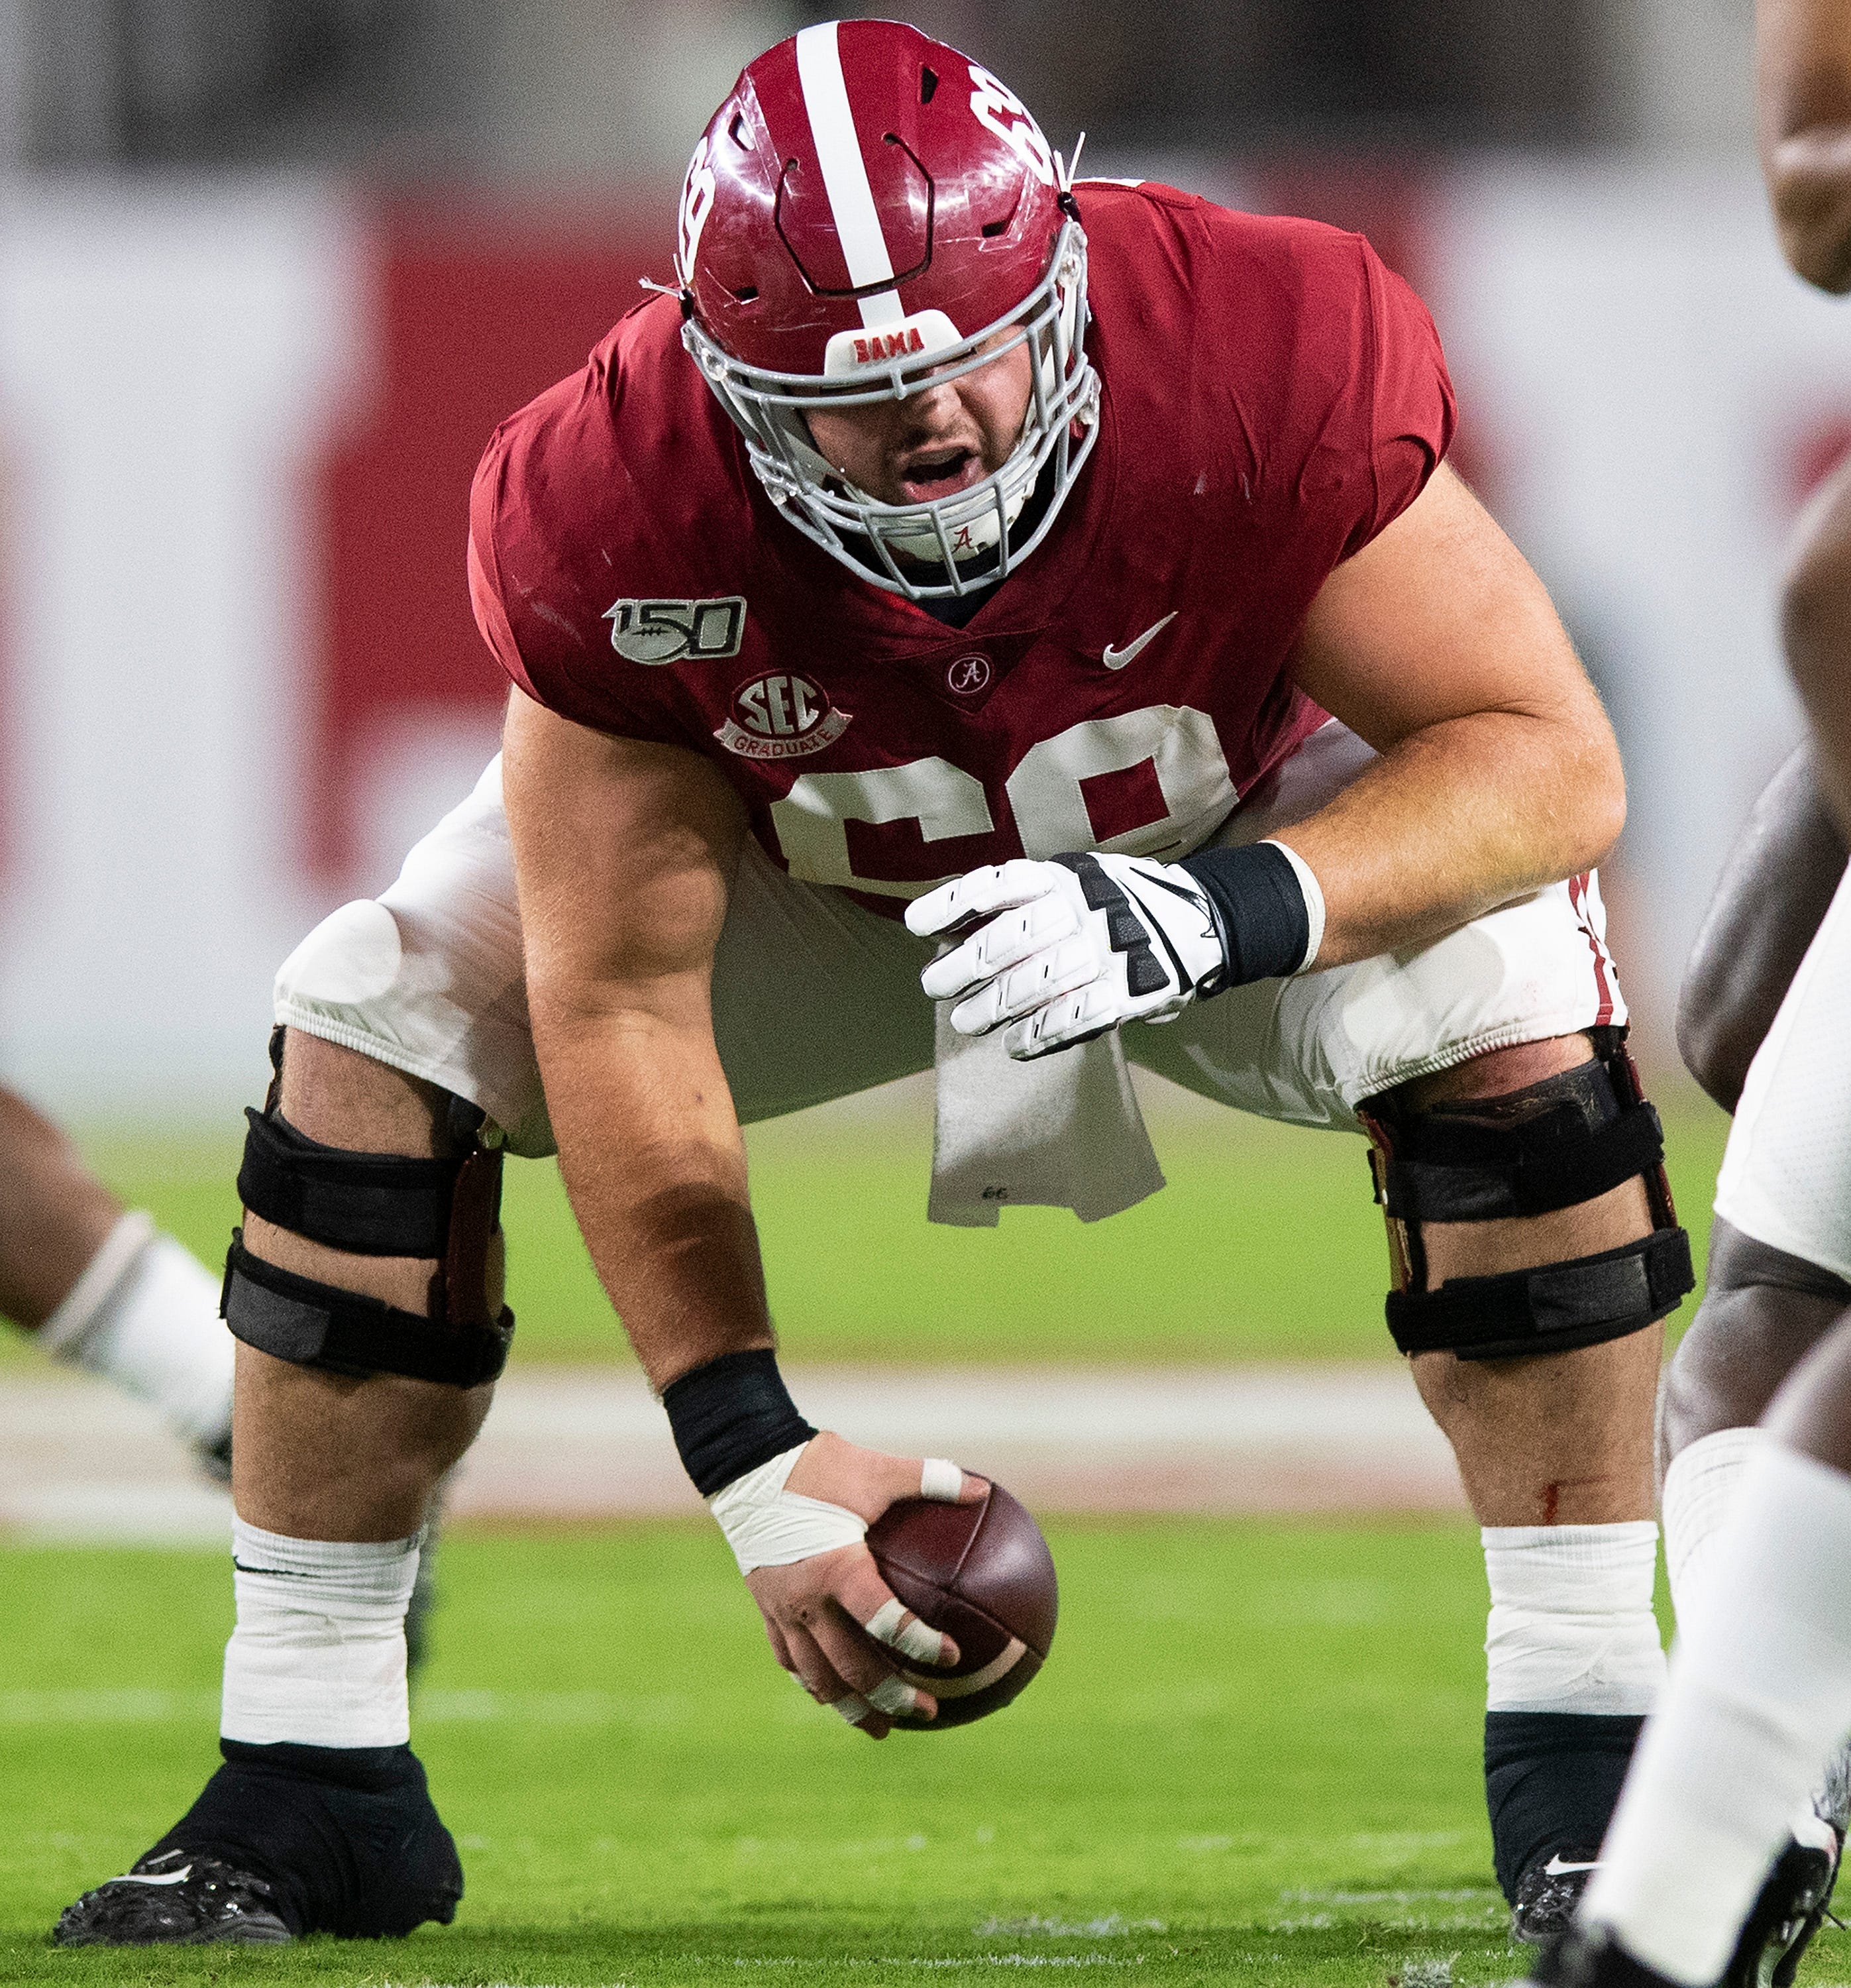 Alabama offensive center Landon Dickerson (69) snaps the ball against Tennessee at Bryant-Denny Stadium in Tuscaloosa, Ala., on Saturday October 19, 2019.